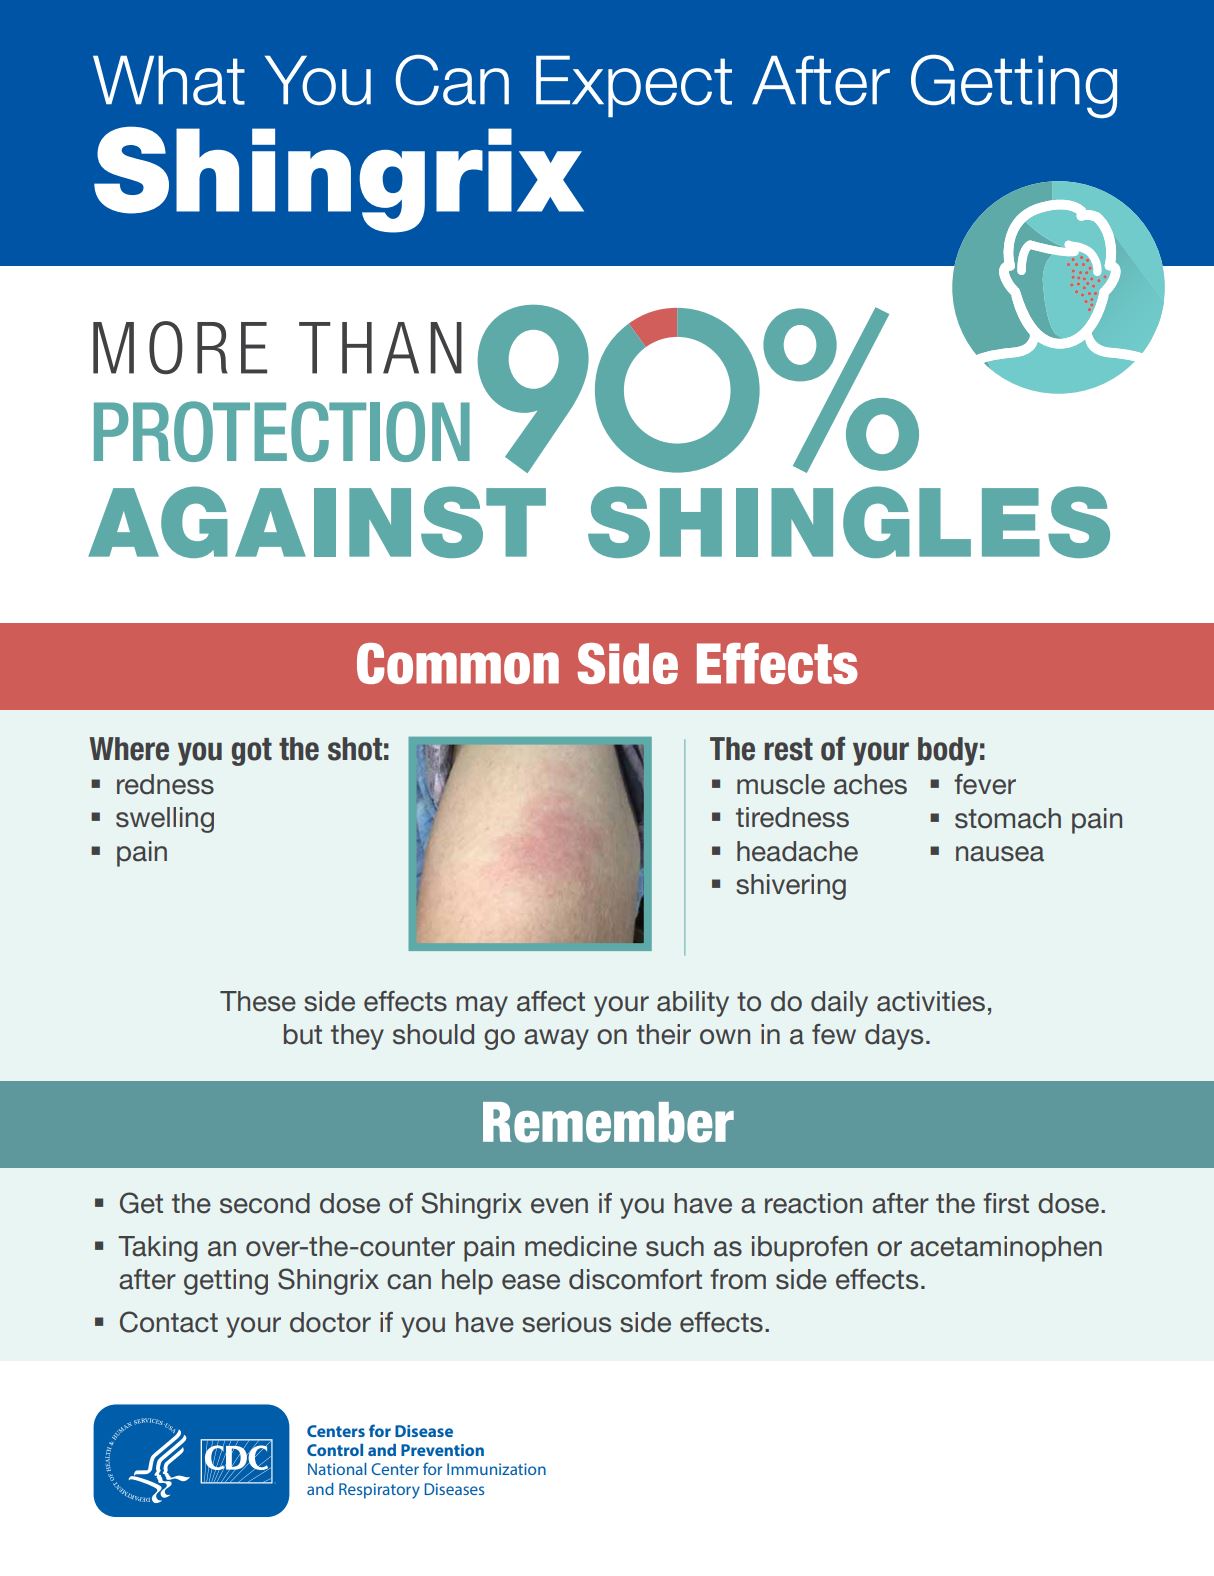 Learn about what to expect after getting the shingles vaccine called Shingrix.